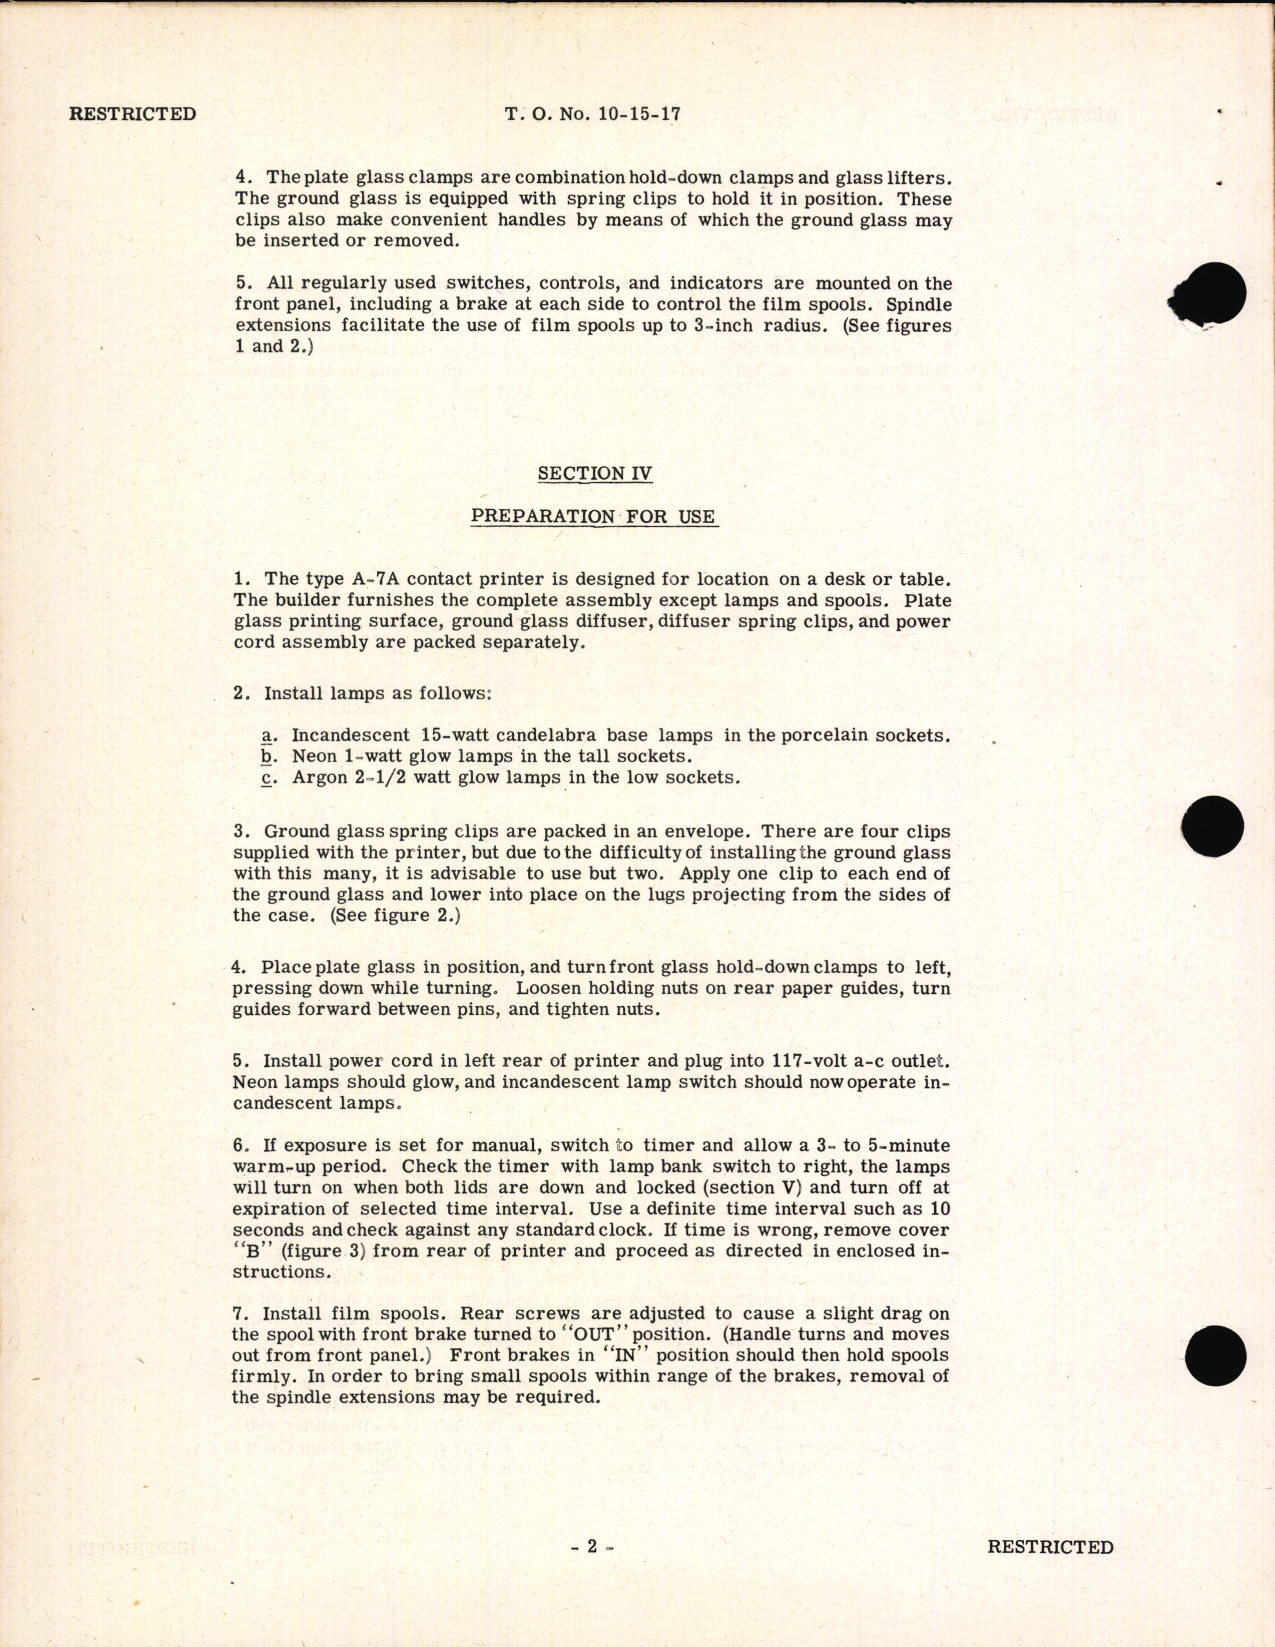 Sample page 6 from AirCorps Library document: Handbook of Instructions with Parts Catalog for Type A-7A Contact Printer